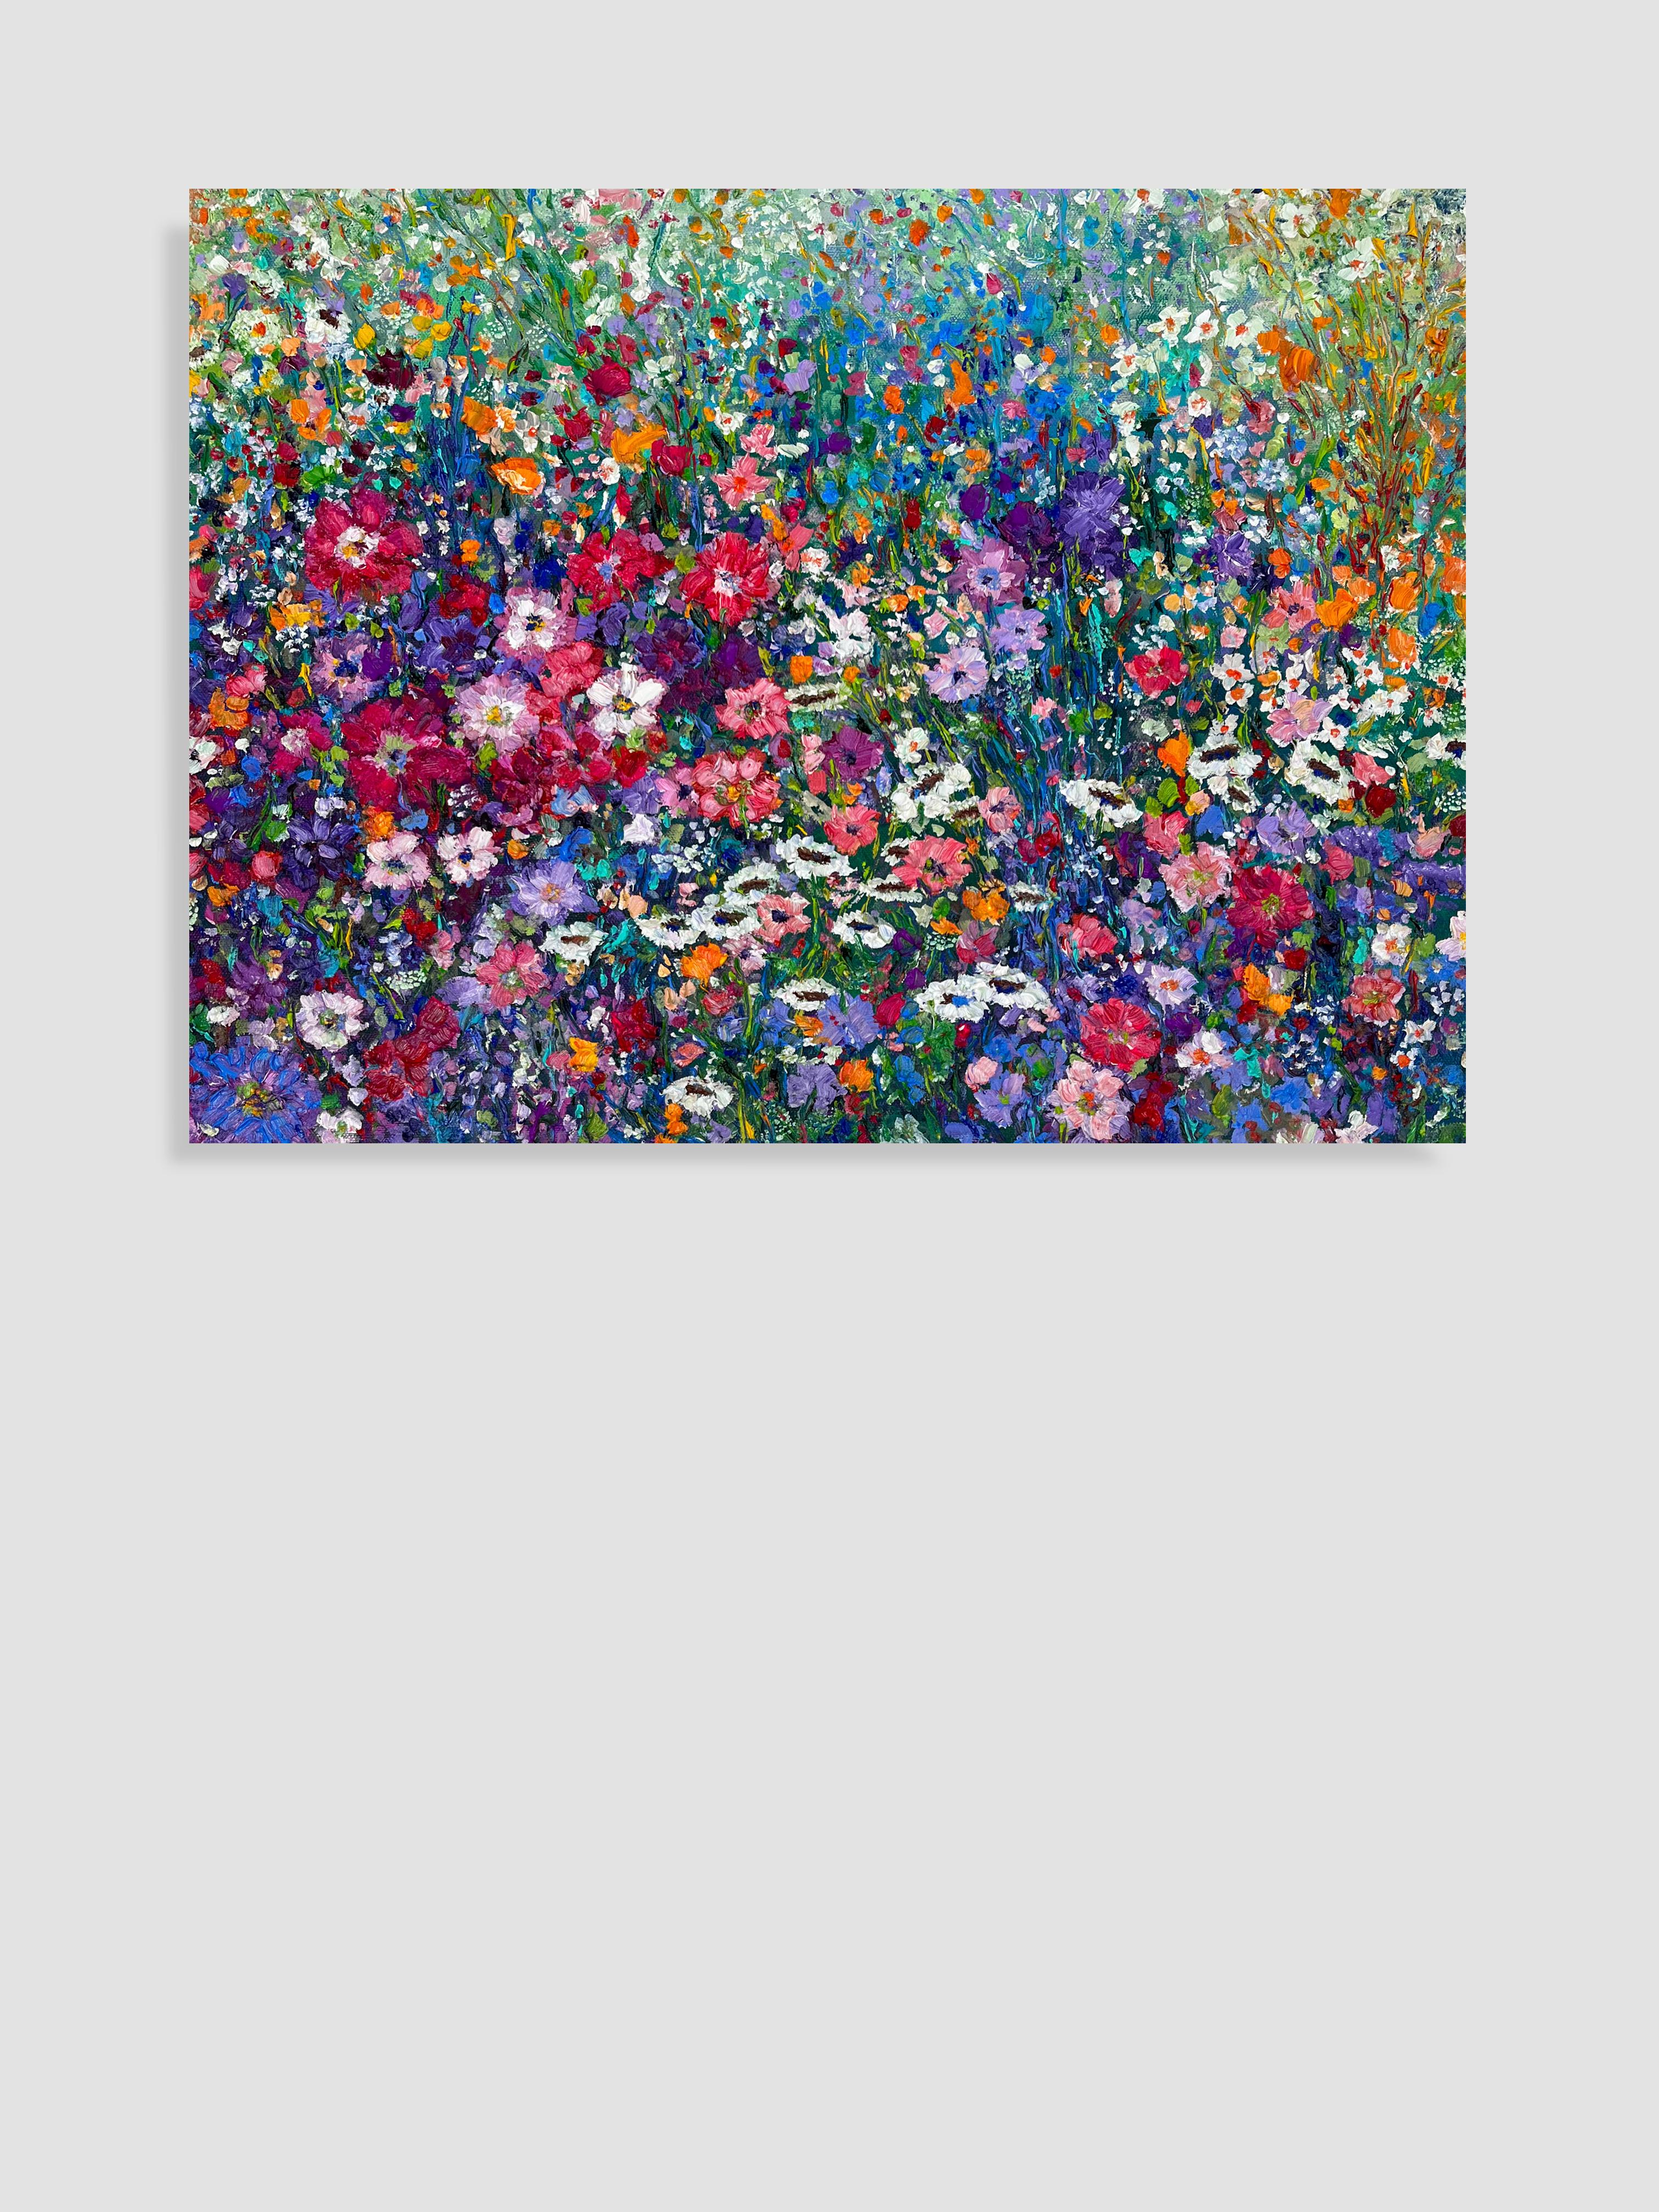 <p>Artist Comments<br>A floral parade commences in spring, with pink, purple, and white wildflowers blooming in the field, tangling up together as they follow the wind. Painted with an impressionist style and a colorful palette, the artwork captures